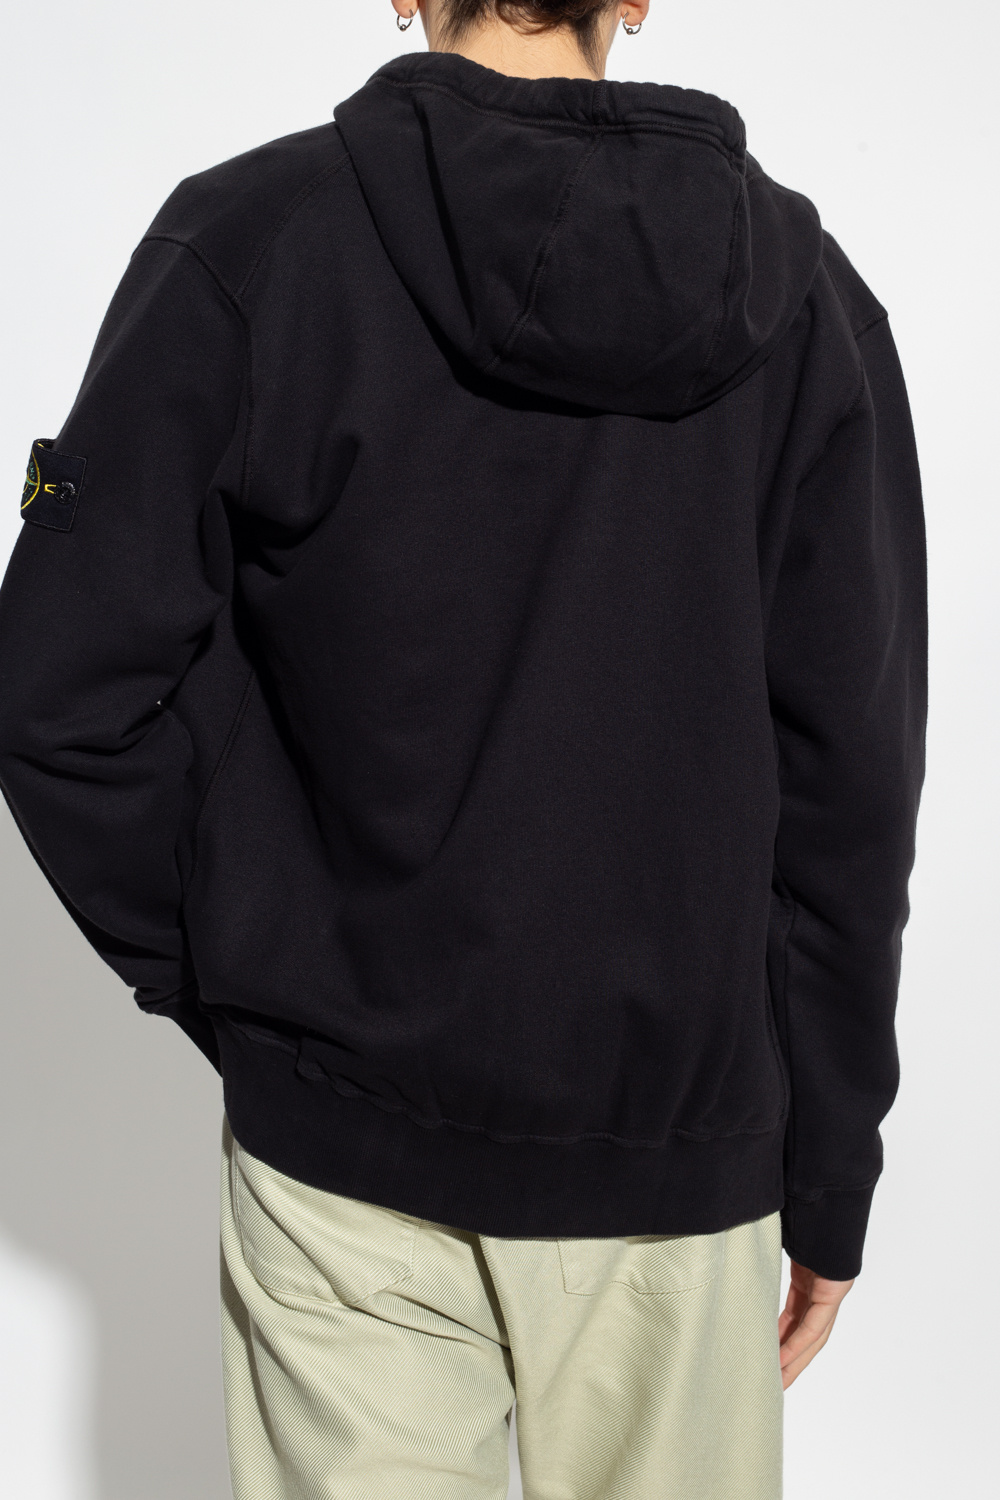 Stone Island feathers hoodie with logo